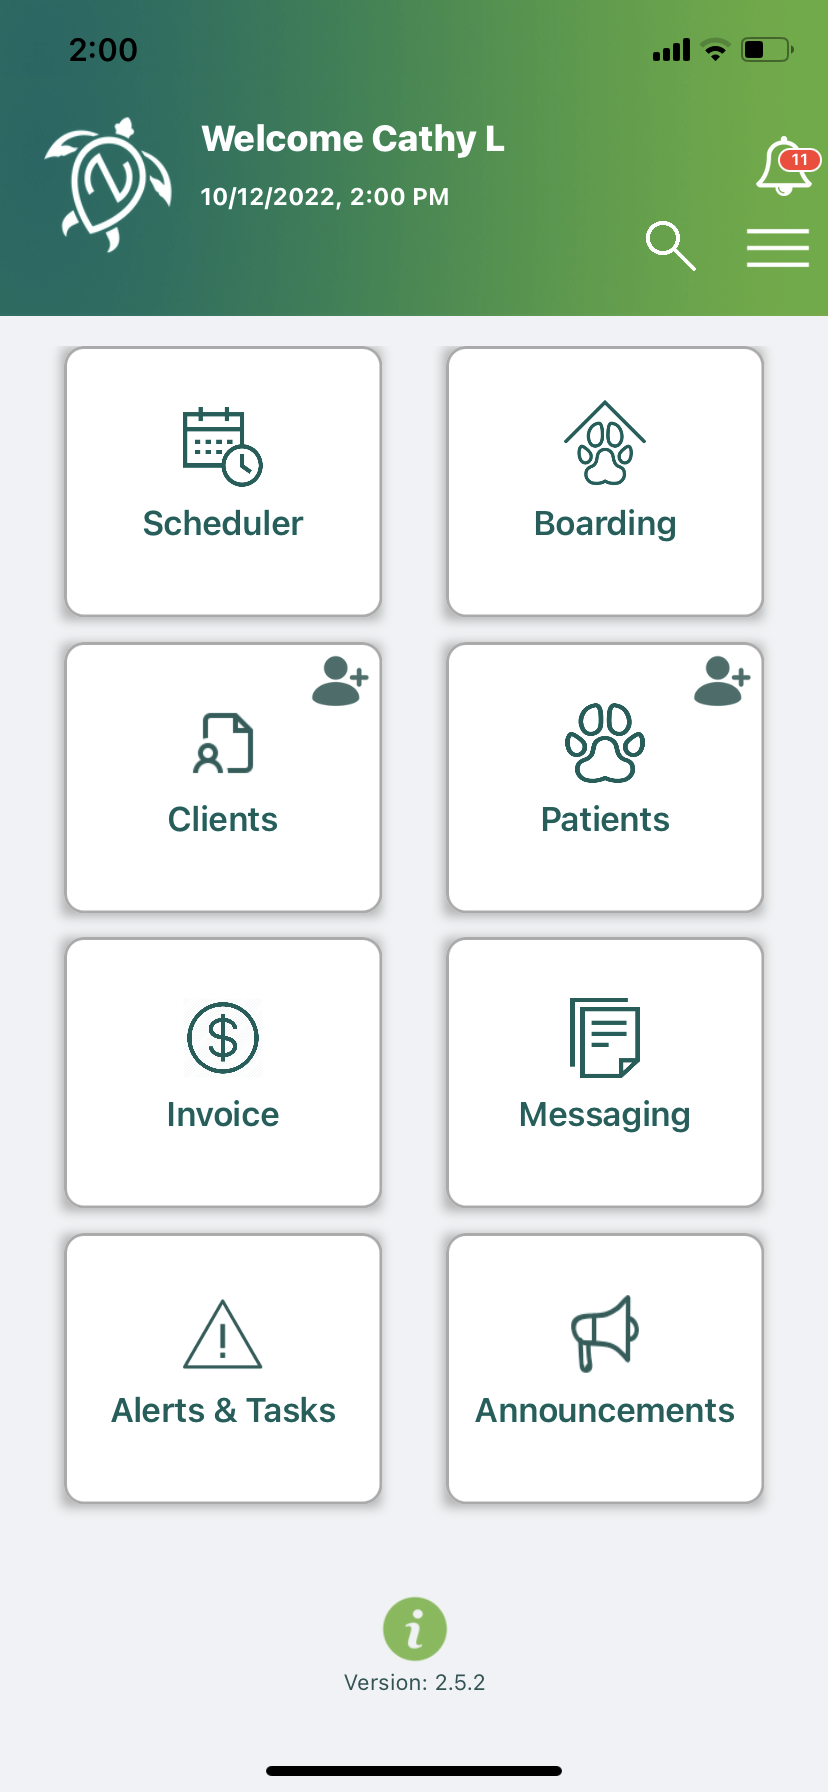 The NaVetor mobile app for practices - a great efficiency tool.